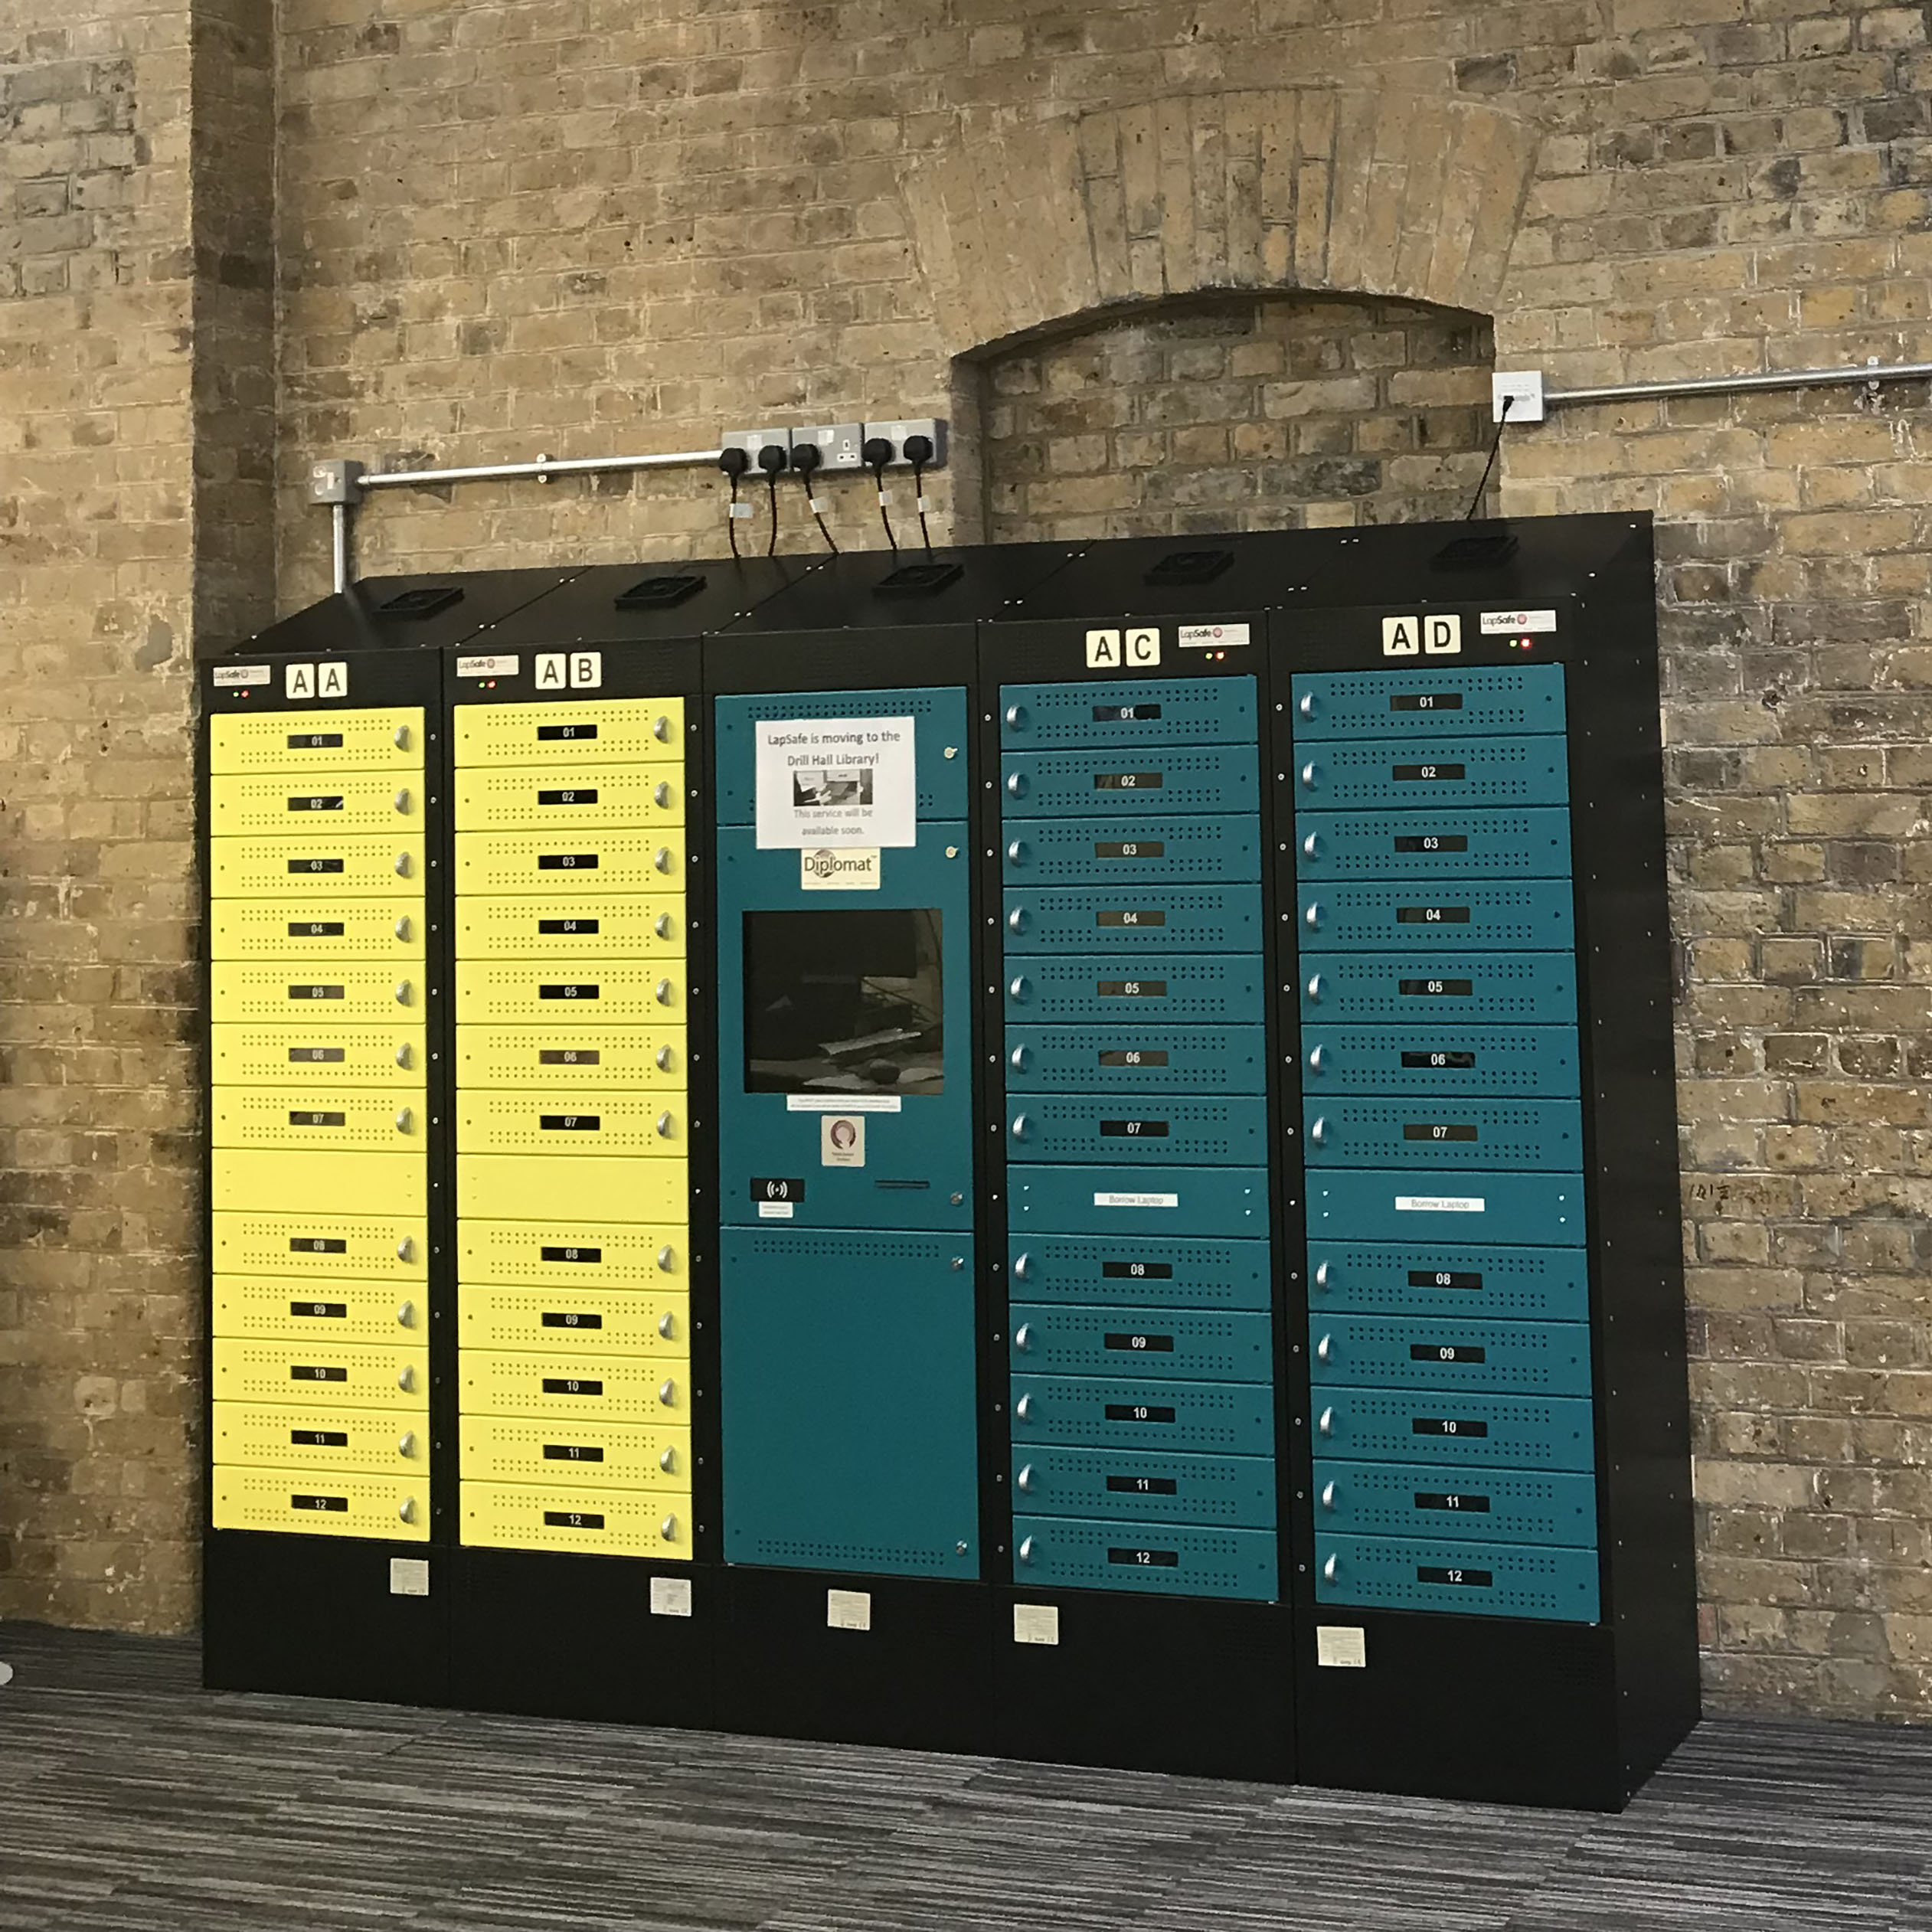 Lapsafe Locker in Drill Hall Library. The lockers are yellow and green with a black surround. It stands tall against an exposed brick wall.